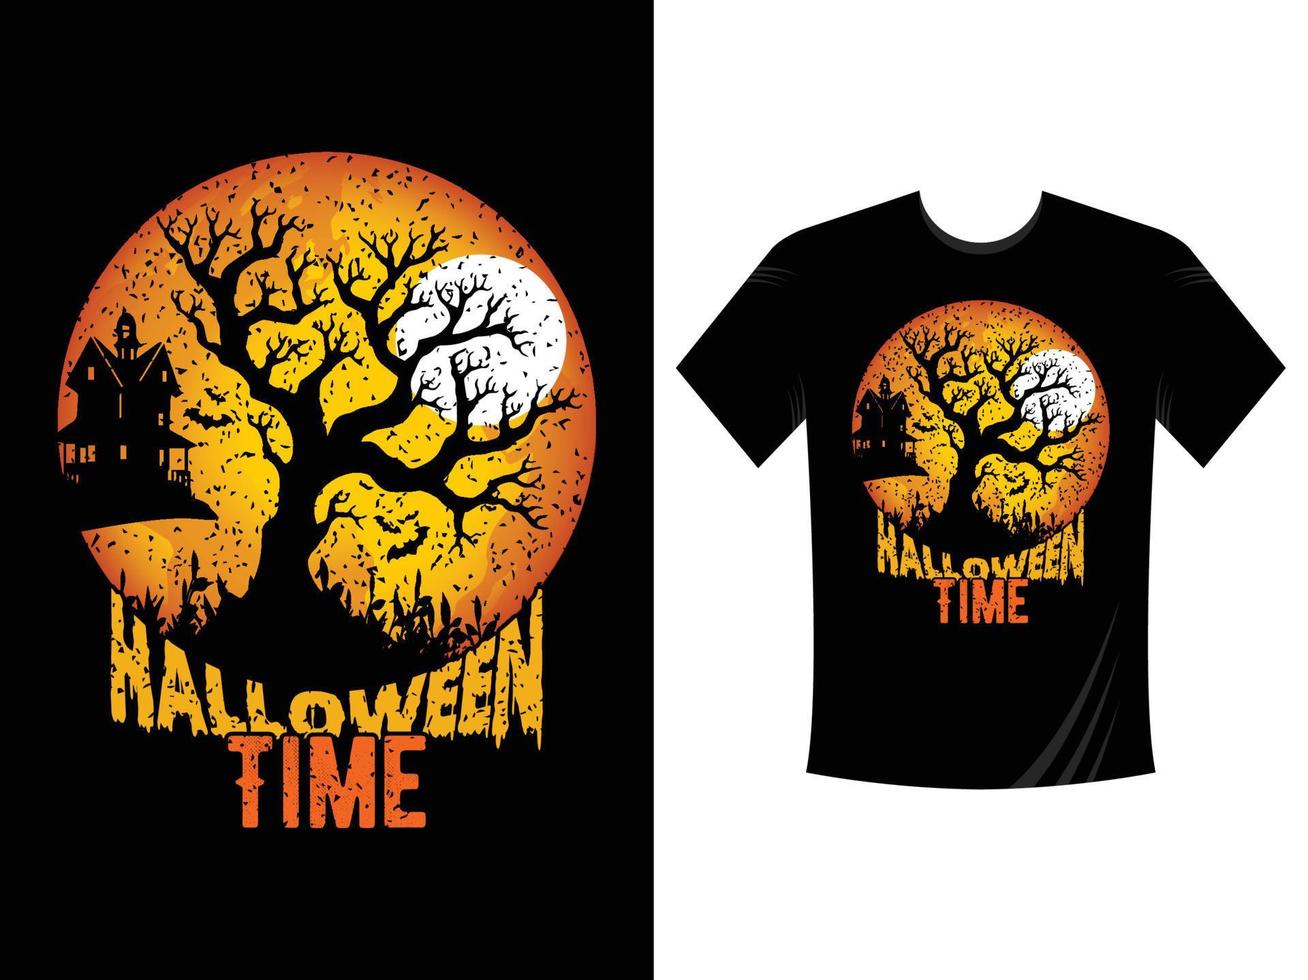 Halloween Time T-Shirt Design, witch, Halloween, illustration, mythology, portrait, pumpkin, scary, sketch, t-shirt design, typography, witches, nightmare, holy death, time, the witch's night, ghost vector